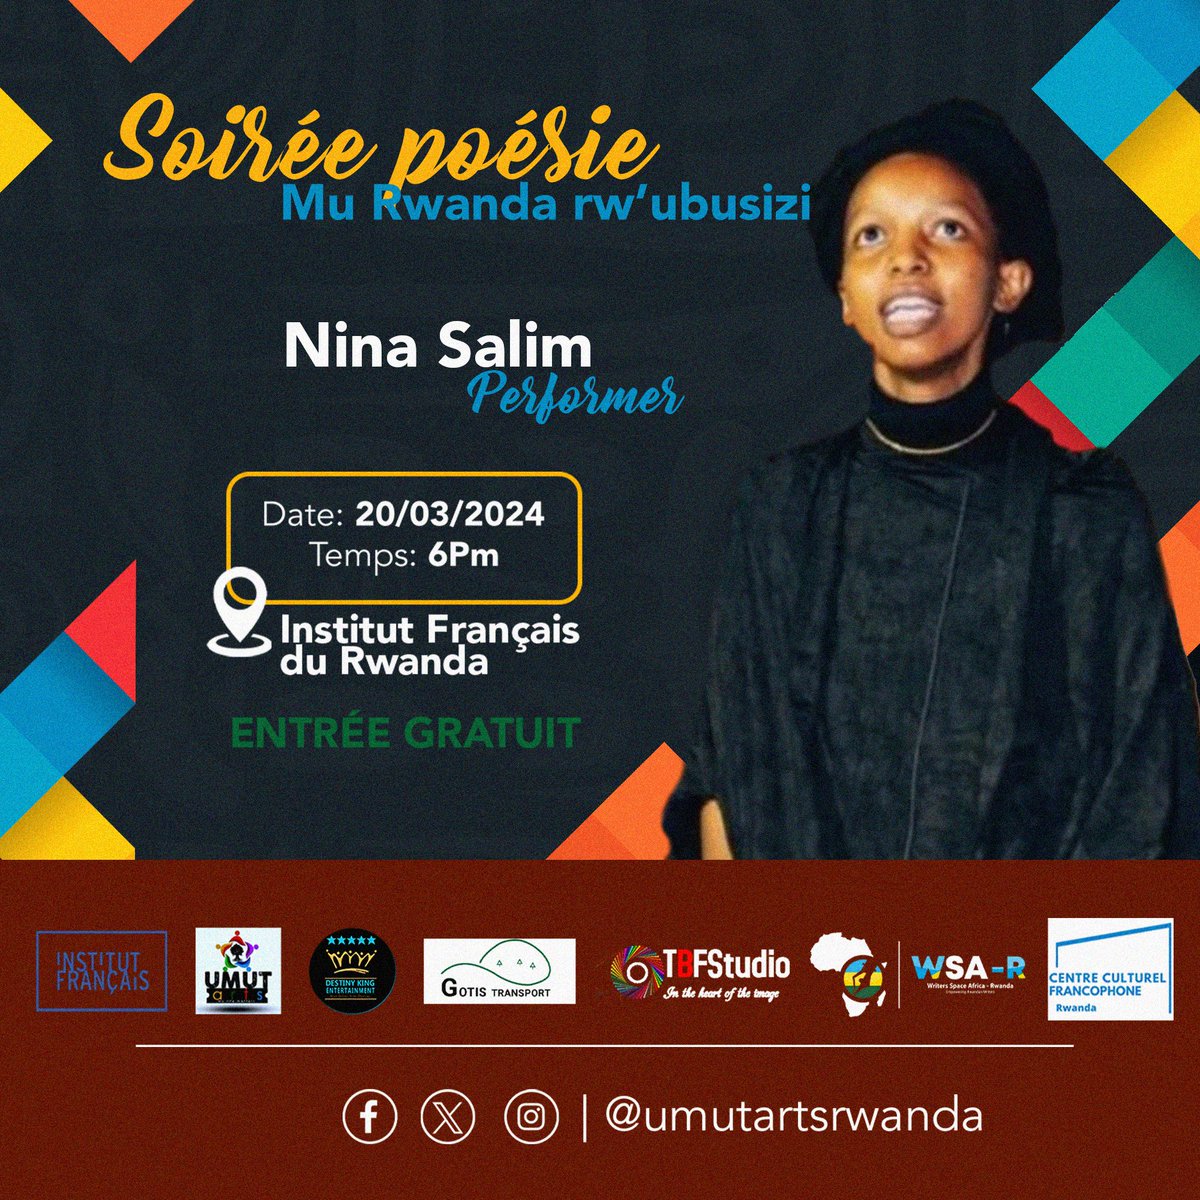 🗣️Don't miss Soirée Poesie taking place at Institut Français du Rwanda on March 20! We are proud to partner with @umutartsrwanda contributing to bringing it to life. Our members will be performing as well as participating🥳 Register here👇🏾 docs.google.com/forms/d/e/1FAI…